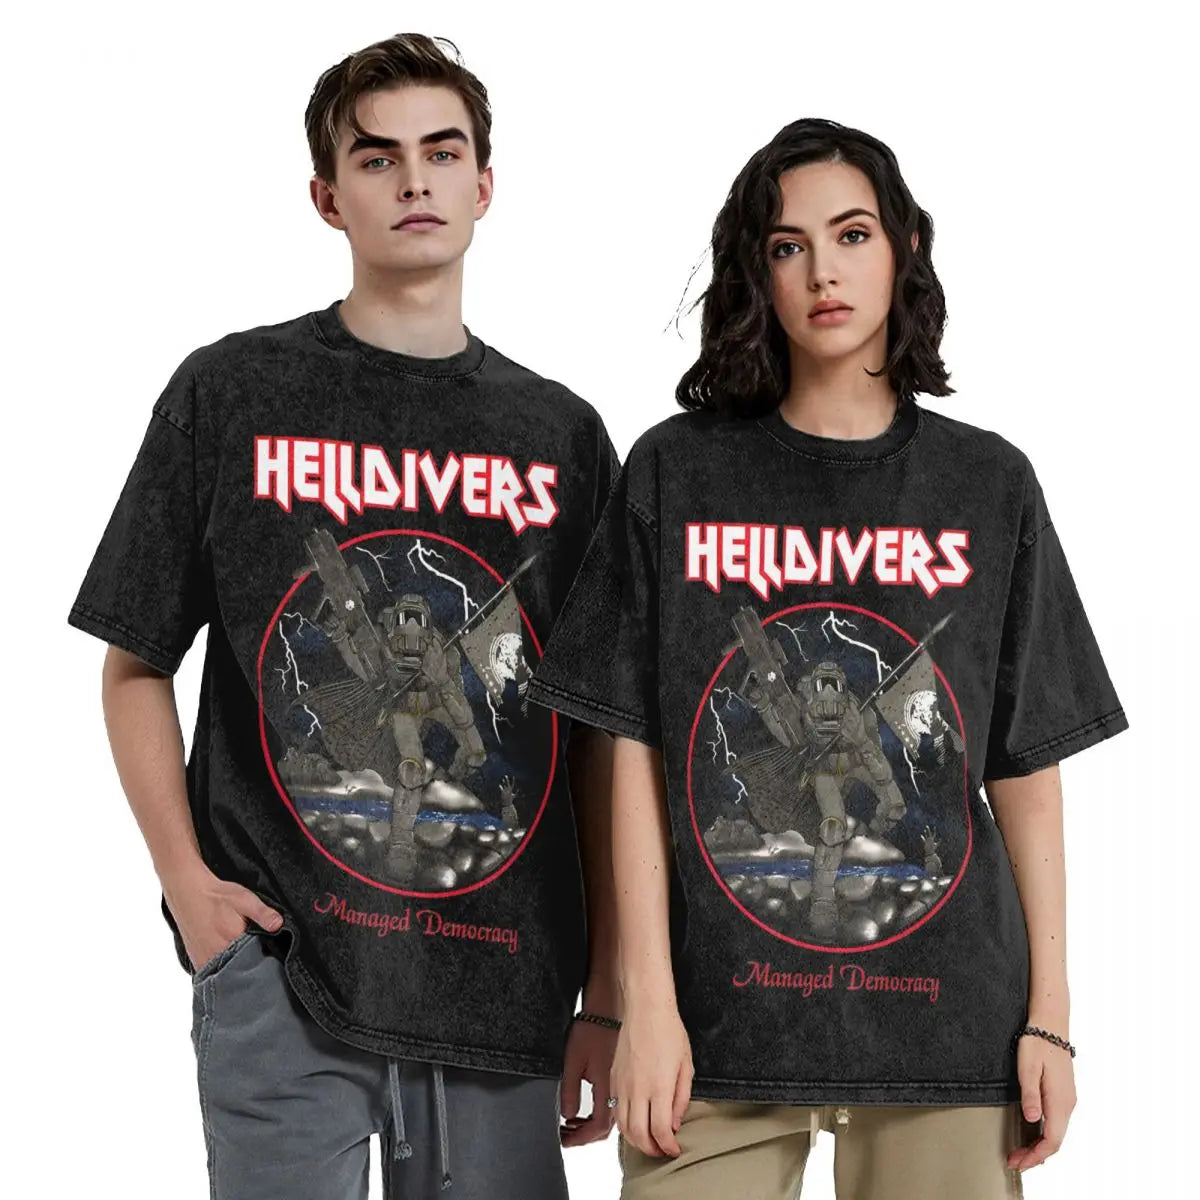 Helldivers 2 Automatons Managed Democracy Outfit Washed T Shirts Streetwear Novelty T-Shirt Video Gaming Helldivers Skull Tees